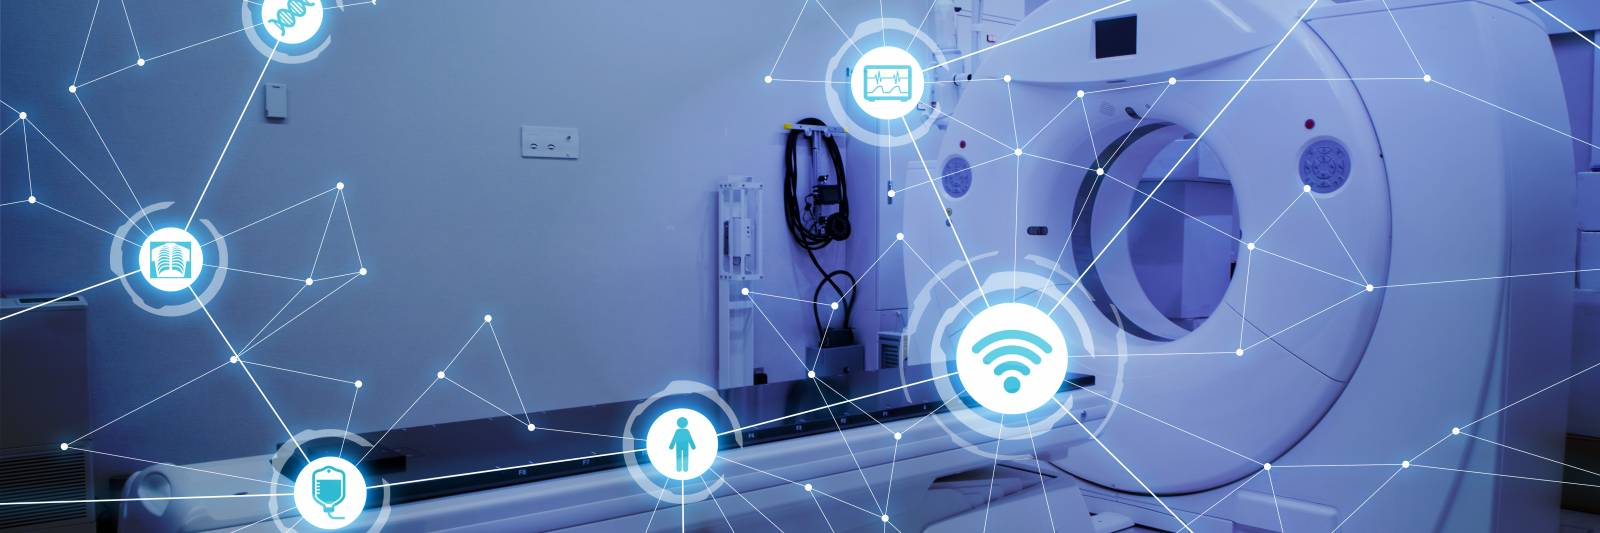 Report: Companies Struggle With Medical Device Security